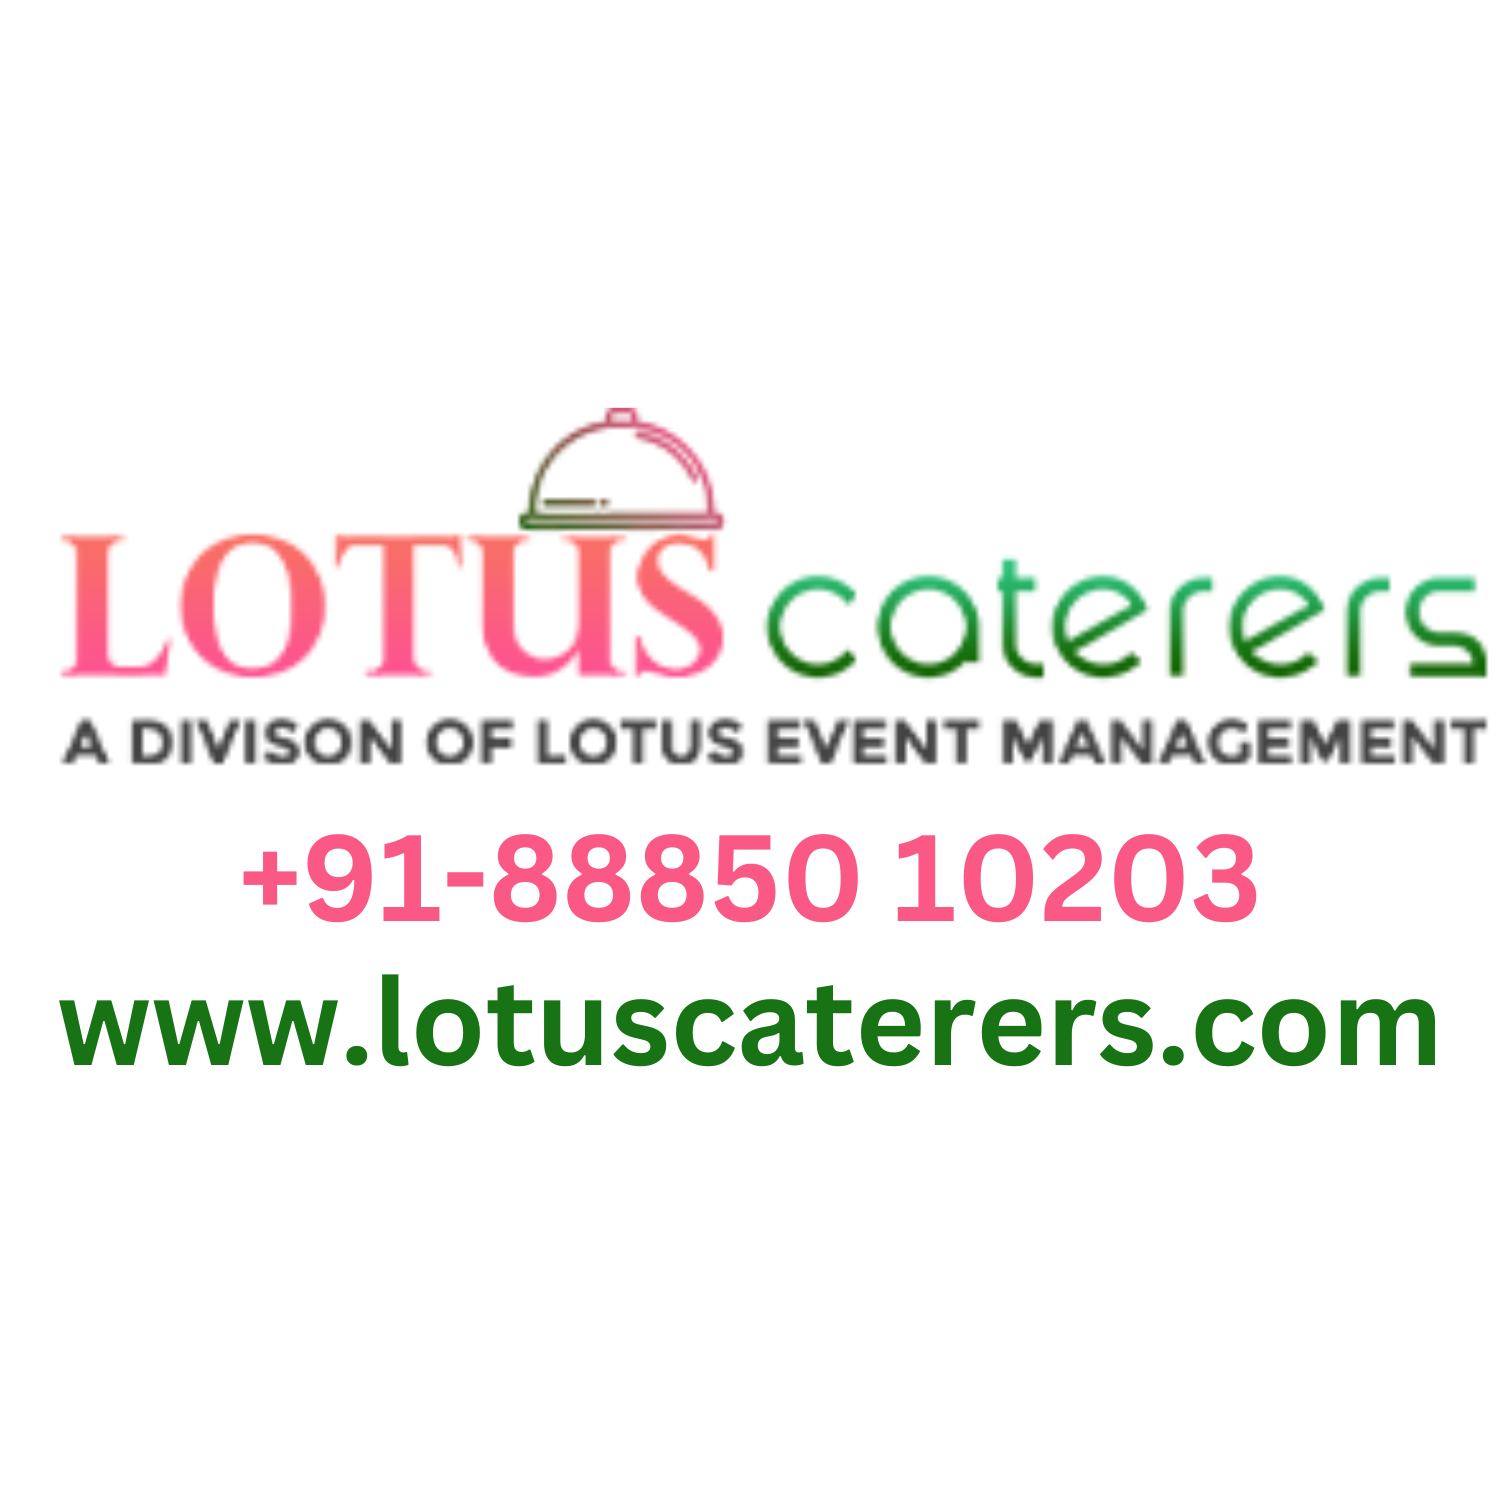 Lotus Caterers - Best Caterers in Hyderabad|Catering Services|Event Services